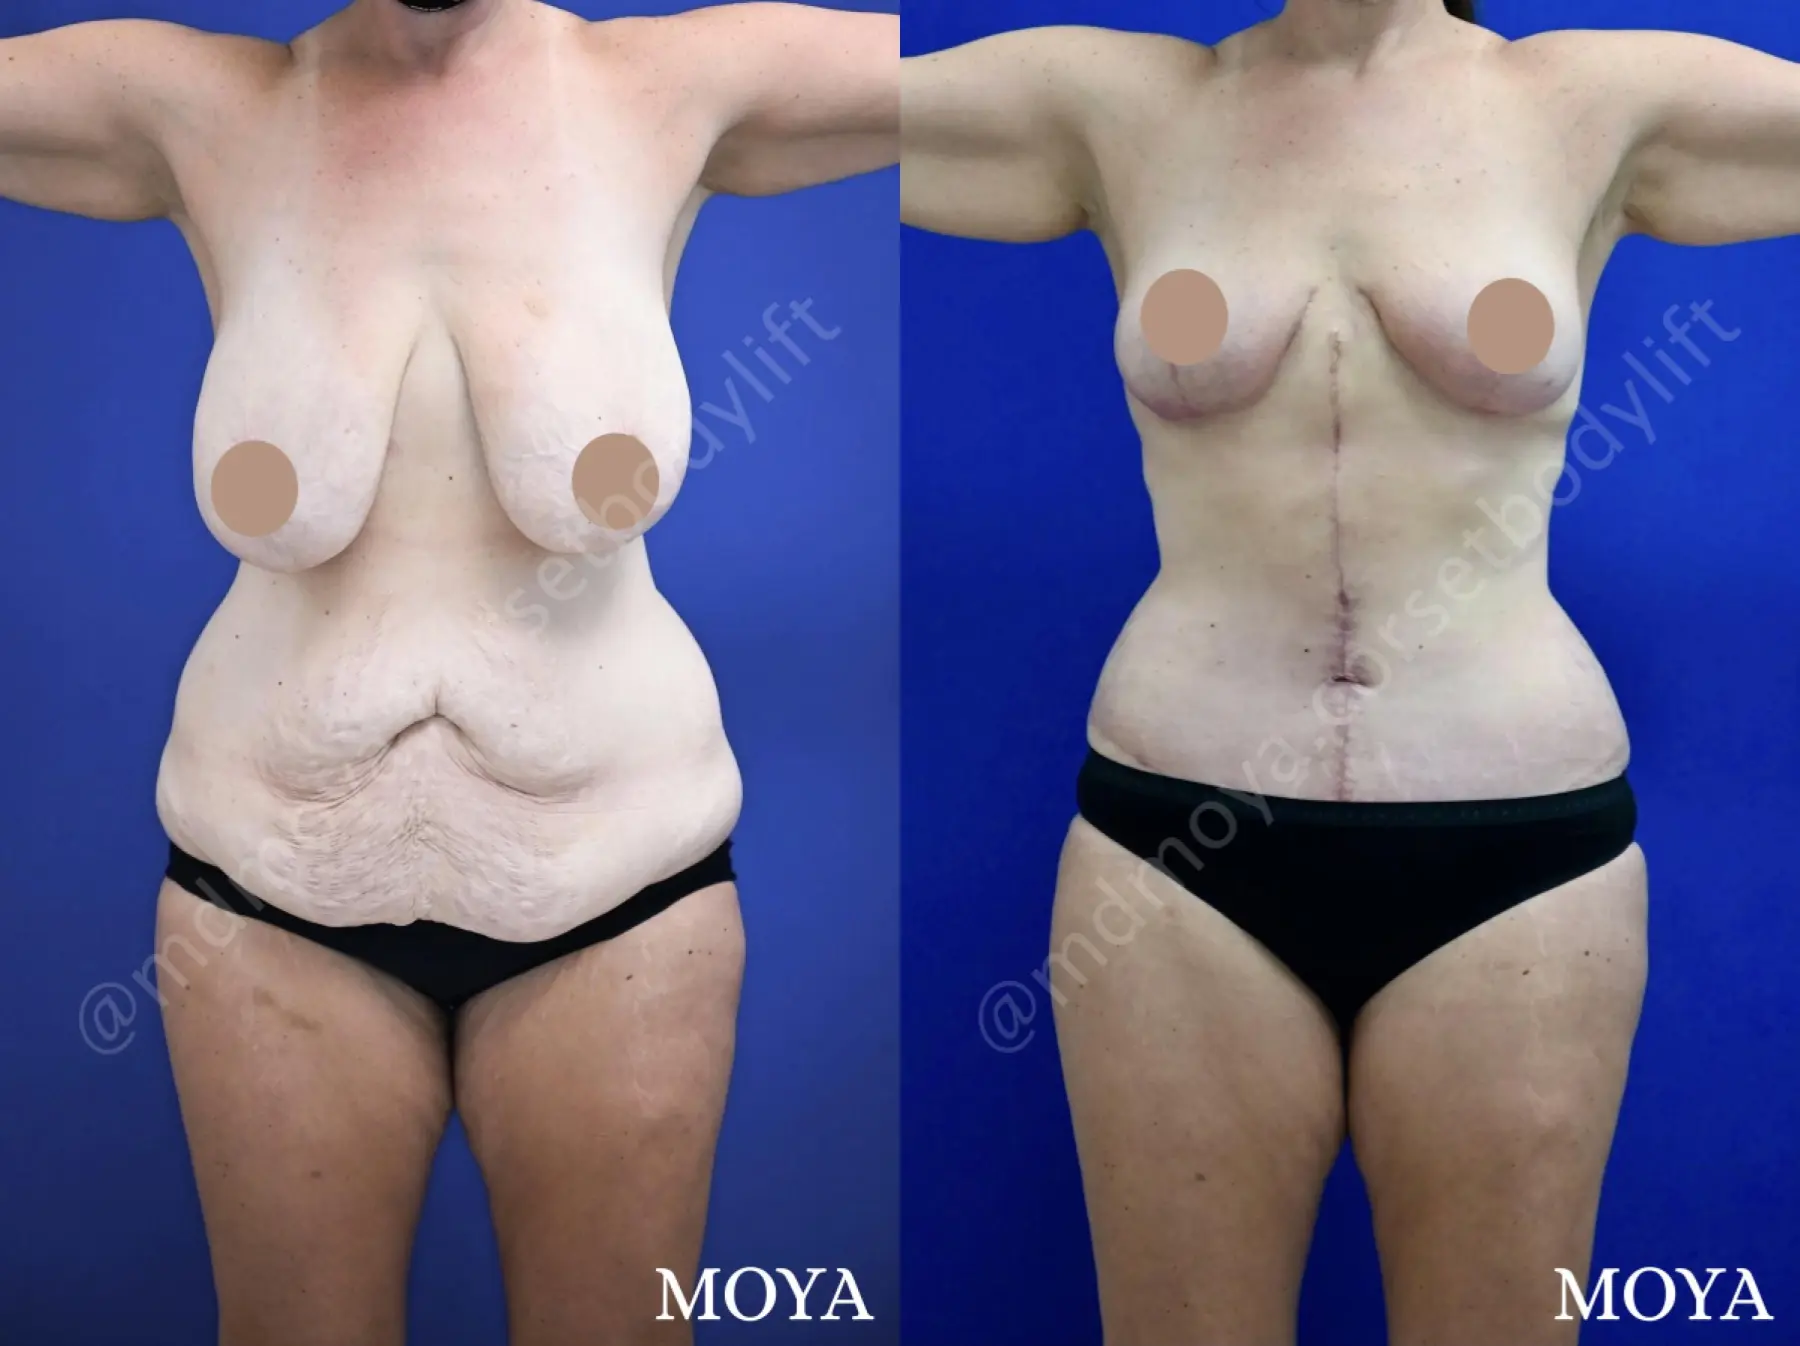 Fleur-de-lis Tummy Tuck (std):  BMI 28 - Before and After 1